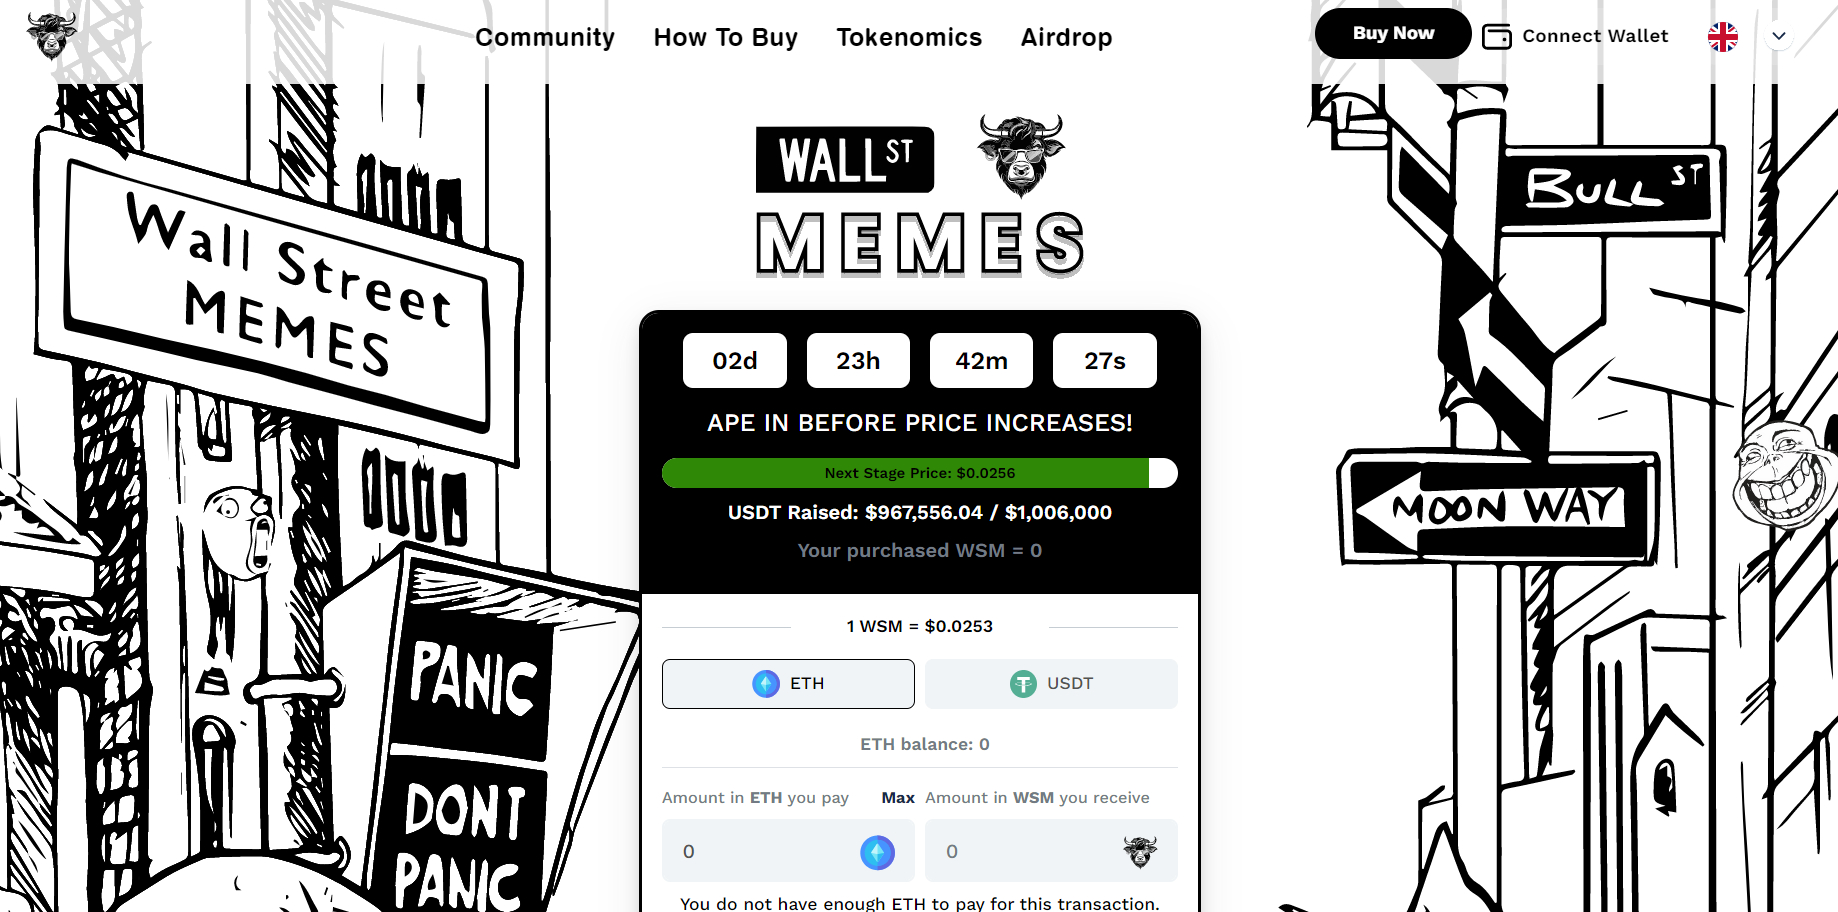 We Asked ChatGPT About Wall Street Memes Token's Future - Here's Its Predictions